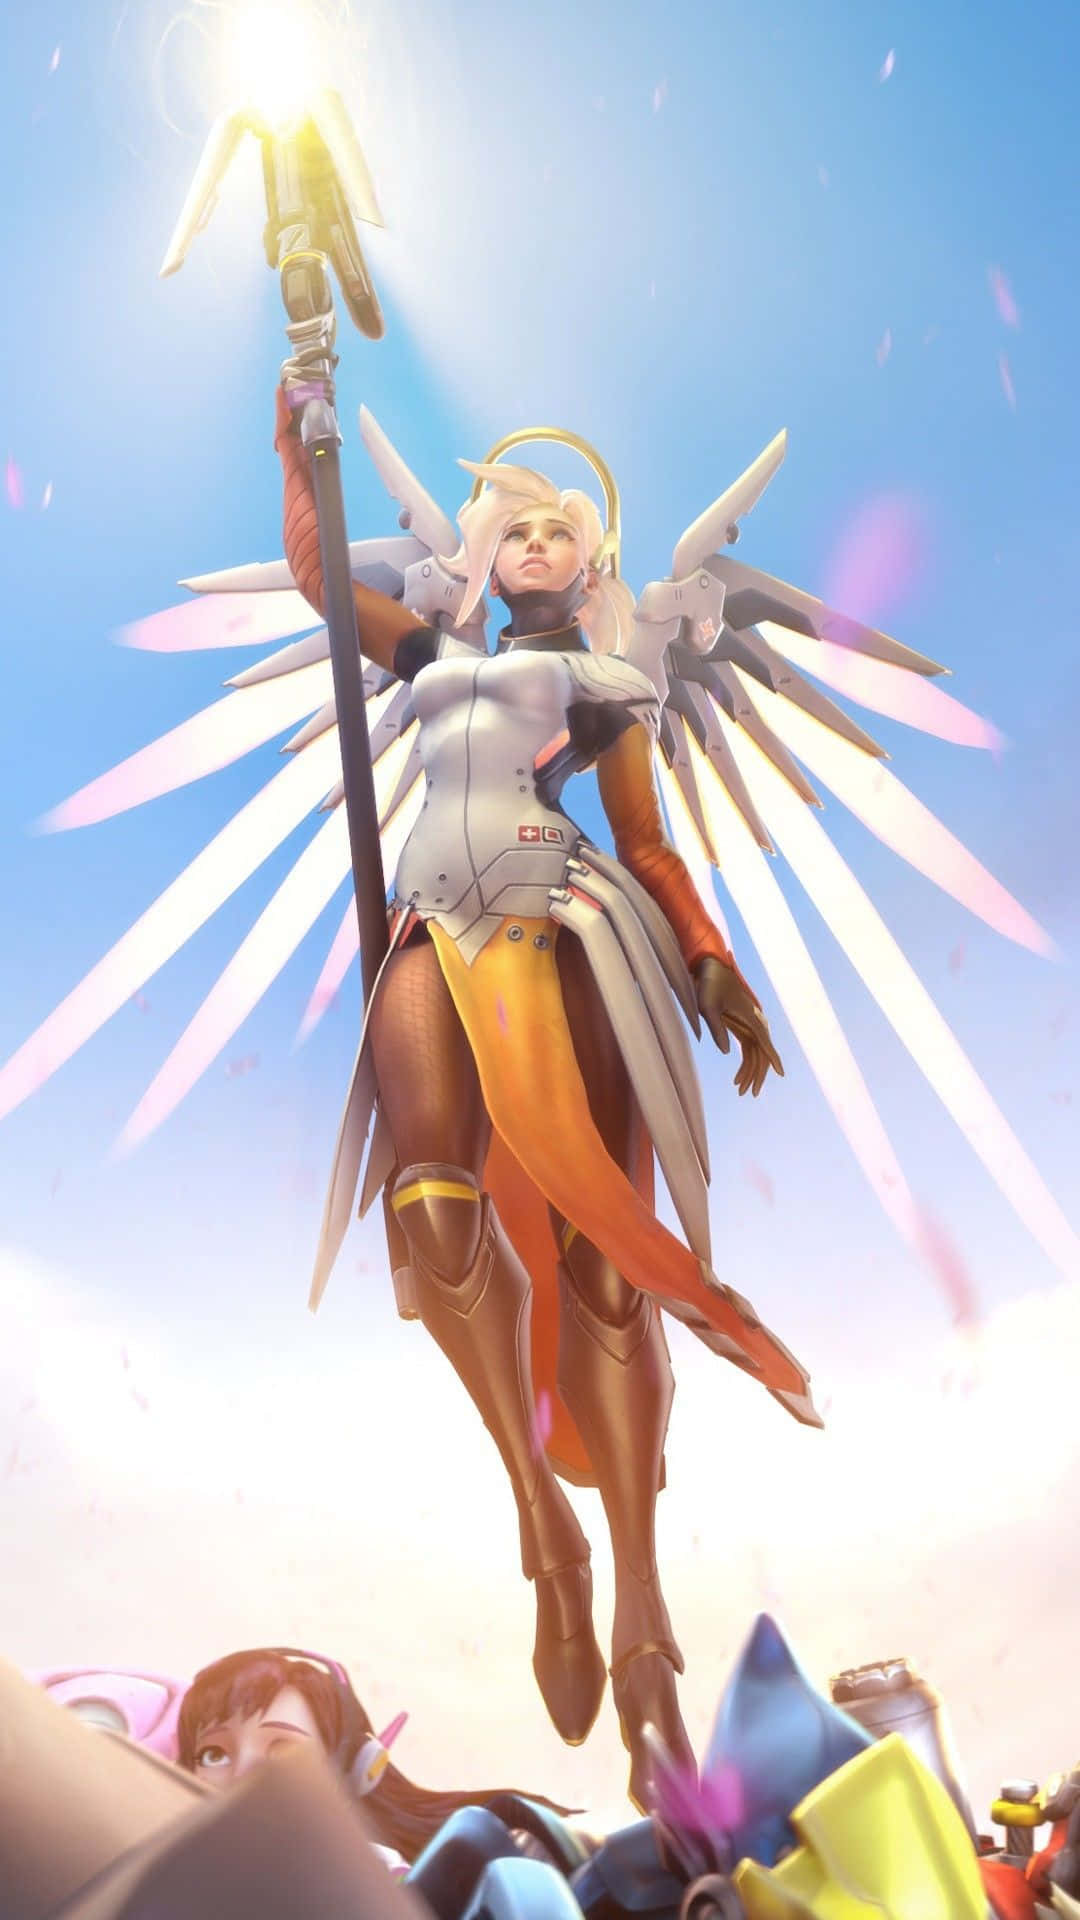 Overwatch's Mercy, The Guardian Angel, Soaring In Action Background